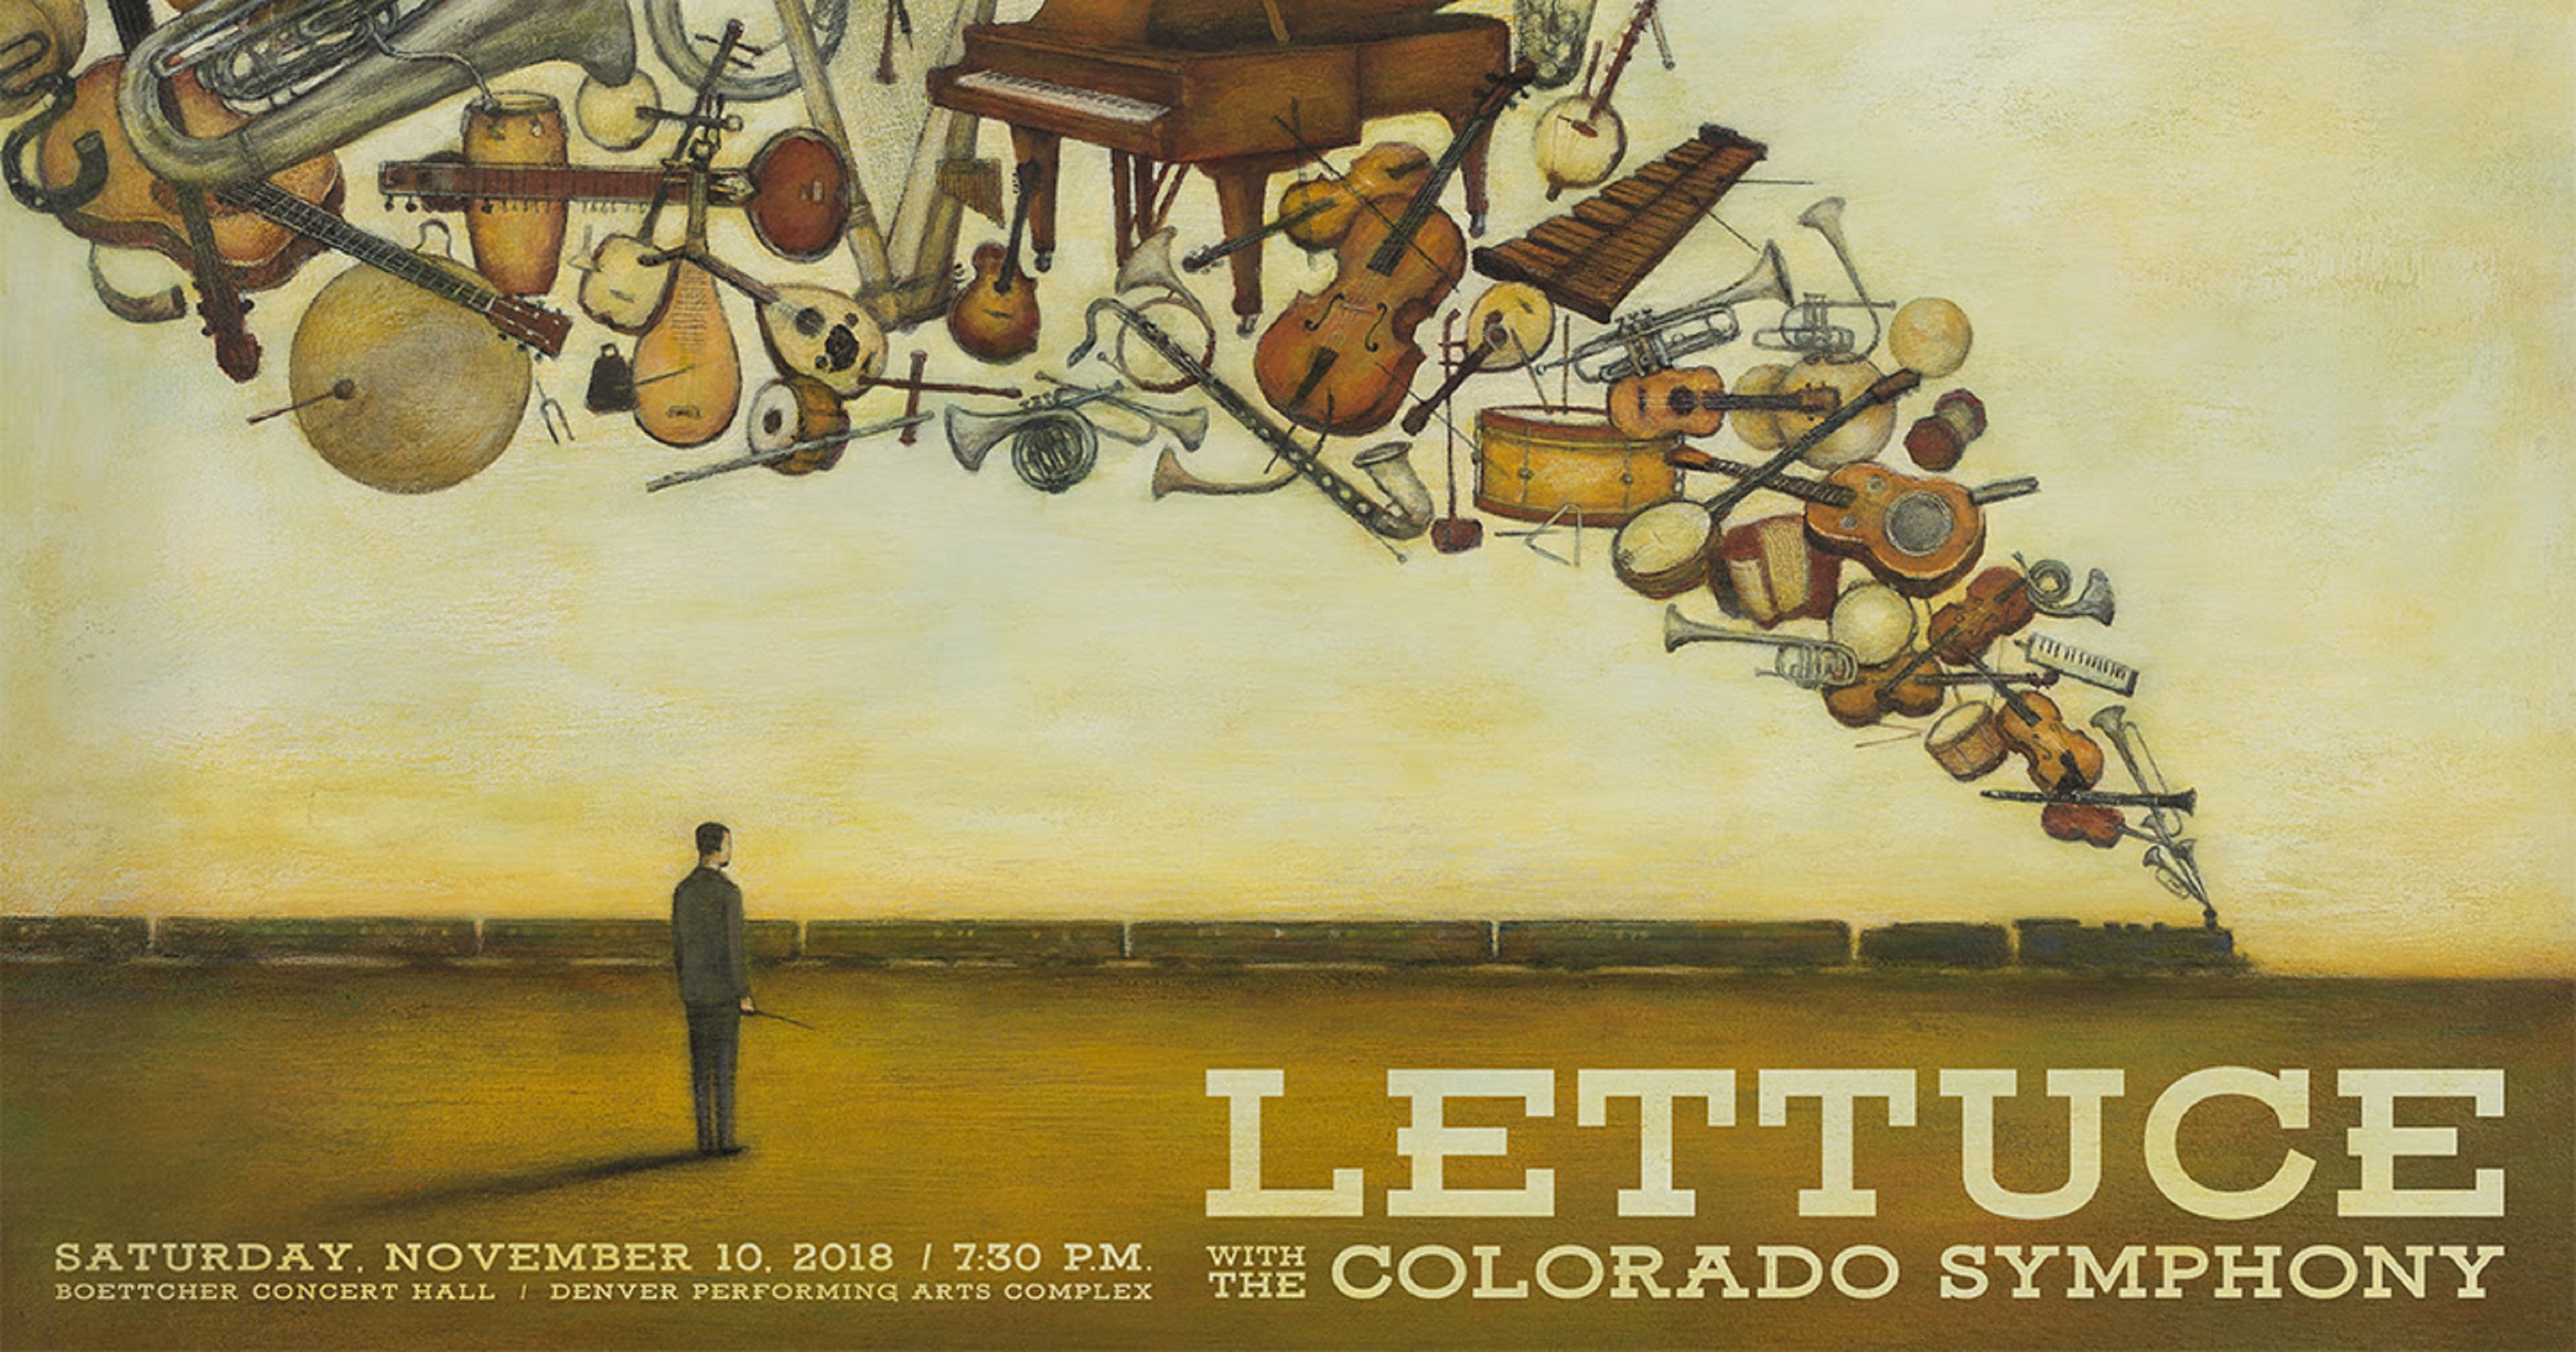 Get Fancy & Funky with Lettuce & The Colorado Symphony